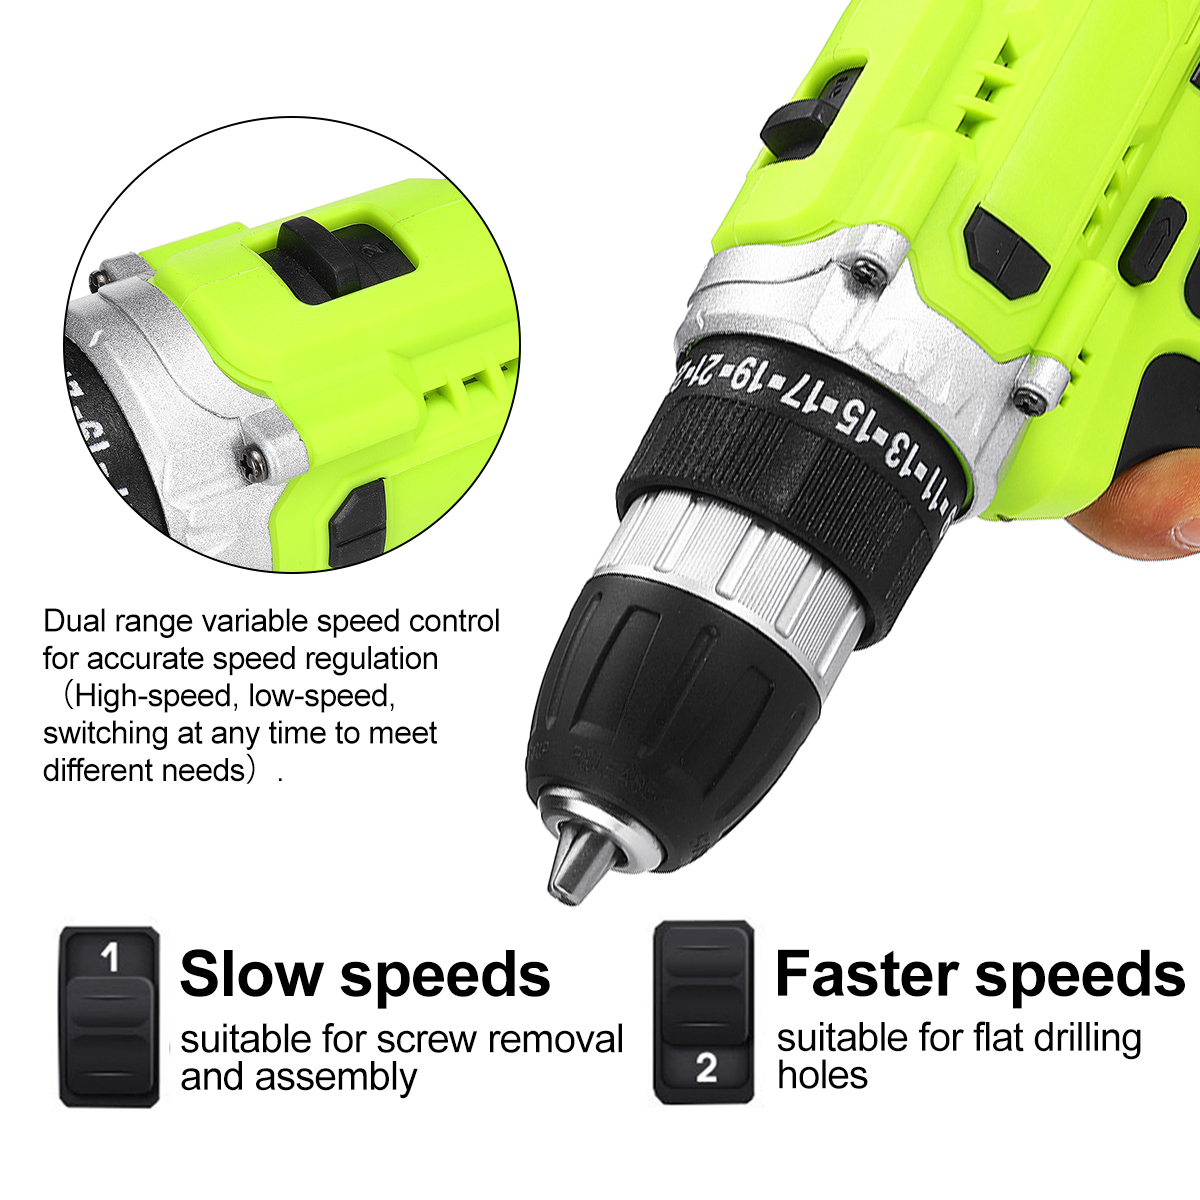 21V-Cordless-Impact-Drill-Set-3-IN-1-Electric-Torque-Wrench-Screwdriver-Drill-W-1-Or-2-Battery-Comes-1837421-6